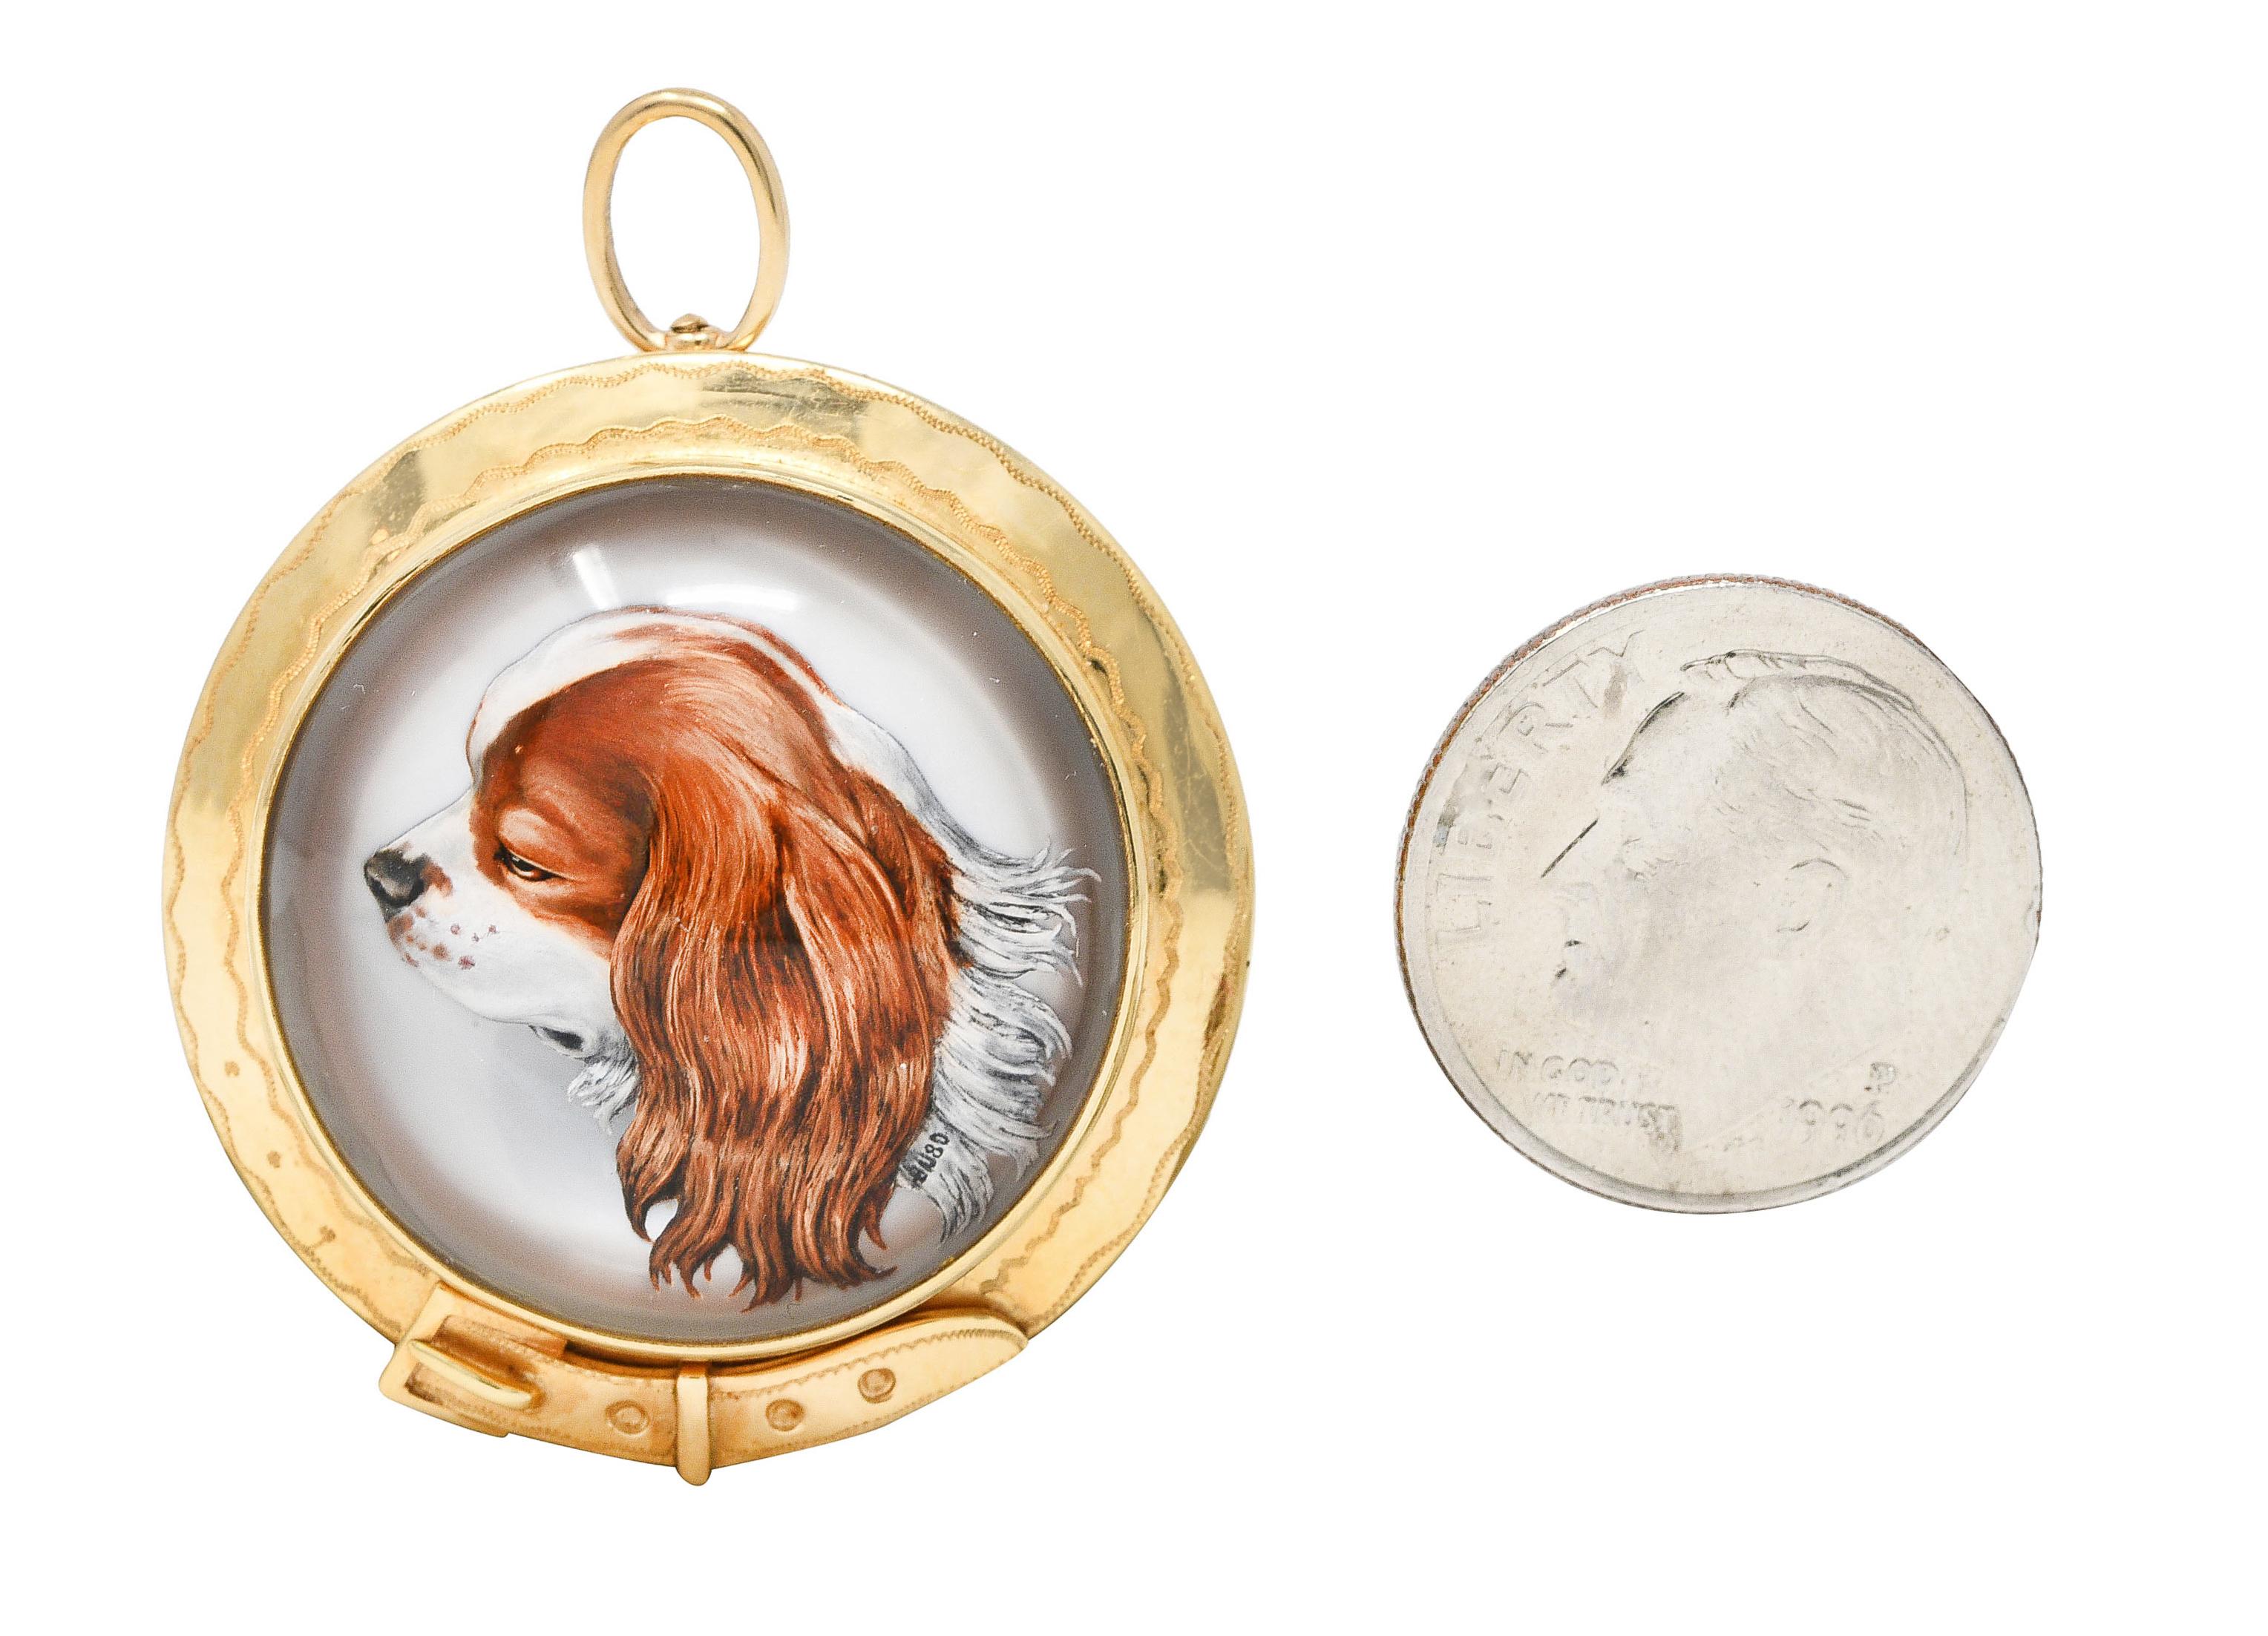 Centering a reverse carved Essex rock crystal cabochon depicting a King Charles spaniel dog. Measuring 23.0 mm round - transparent with opaque white, orange and brown. Backed by mother of pearl - white with subtle iridescence. Bezel set with